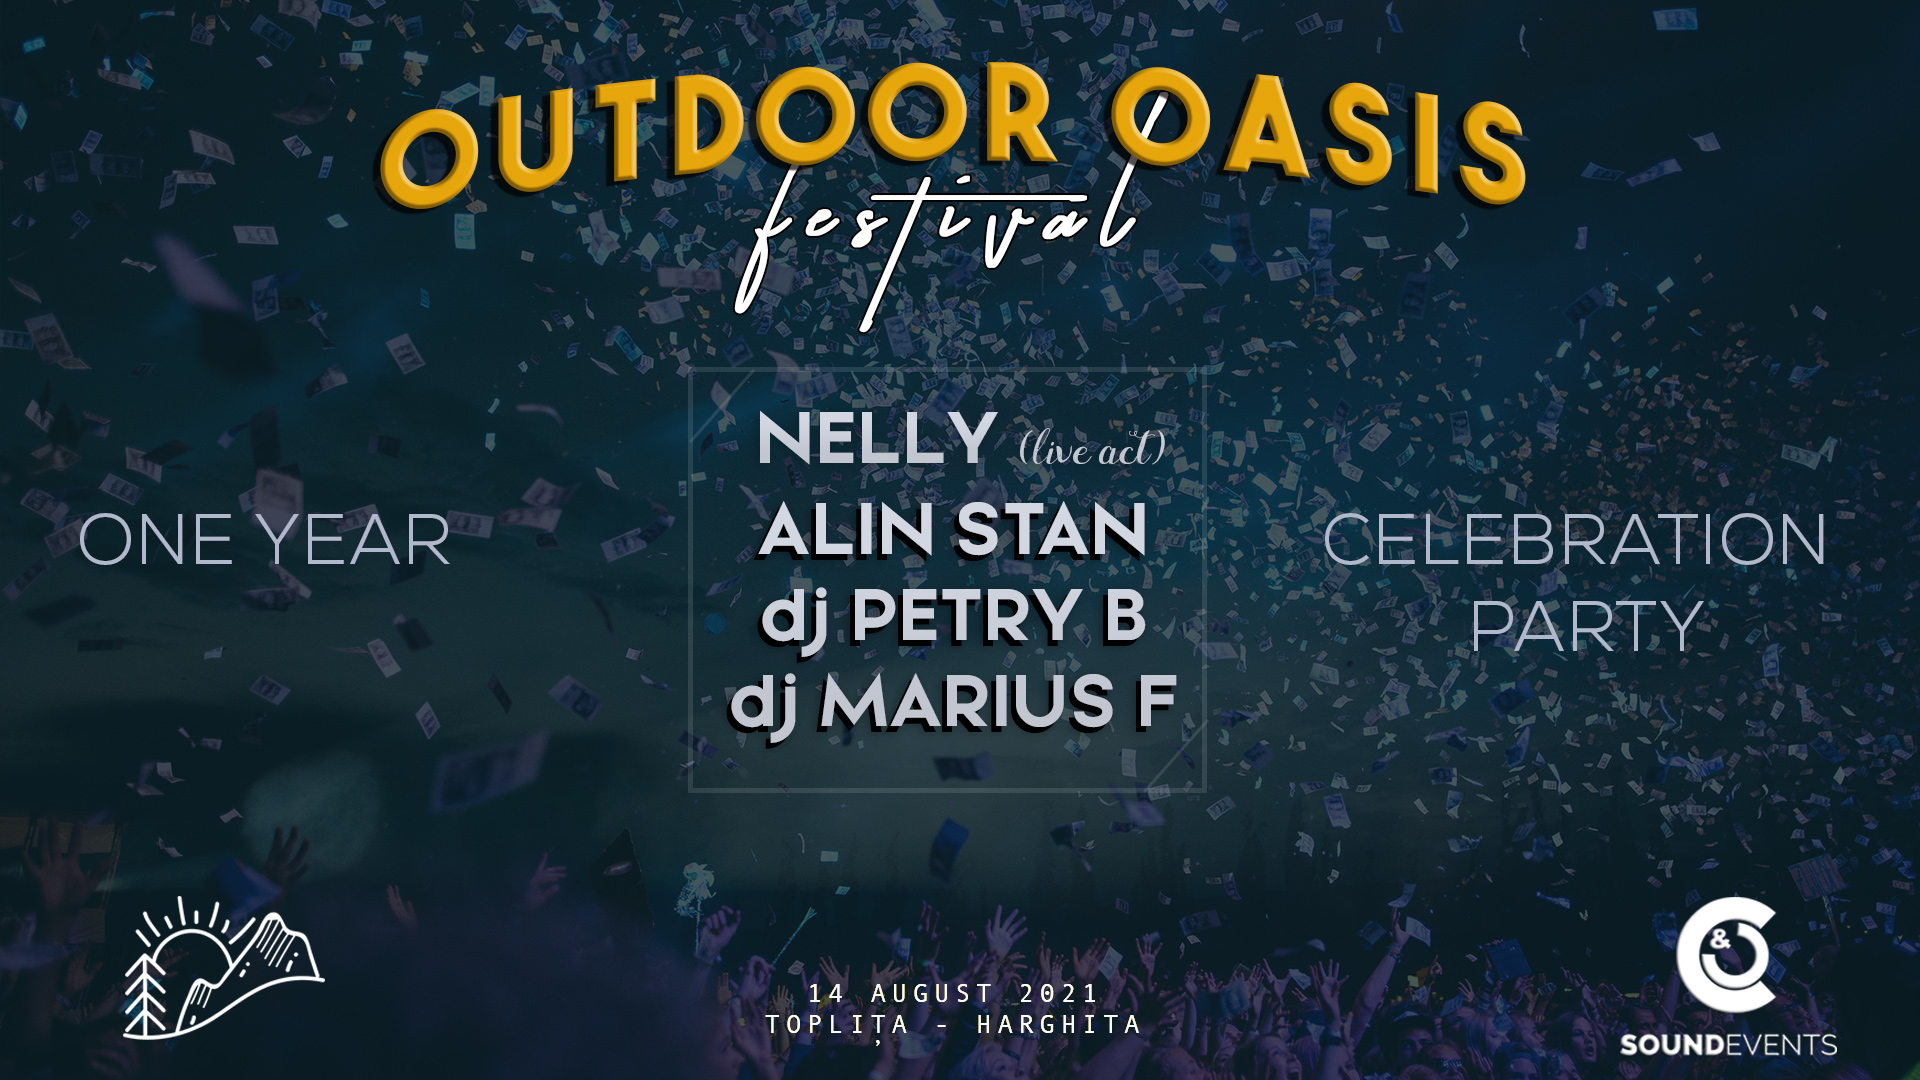 Outdoor Oasis Festival Celebration Party